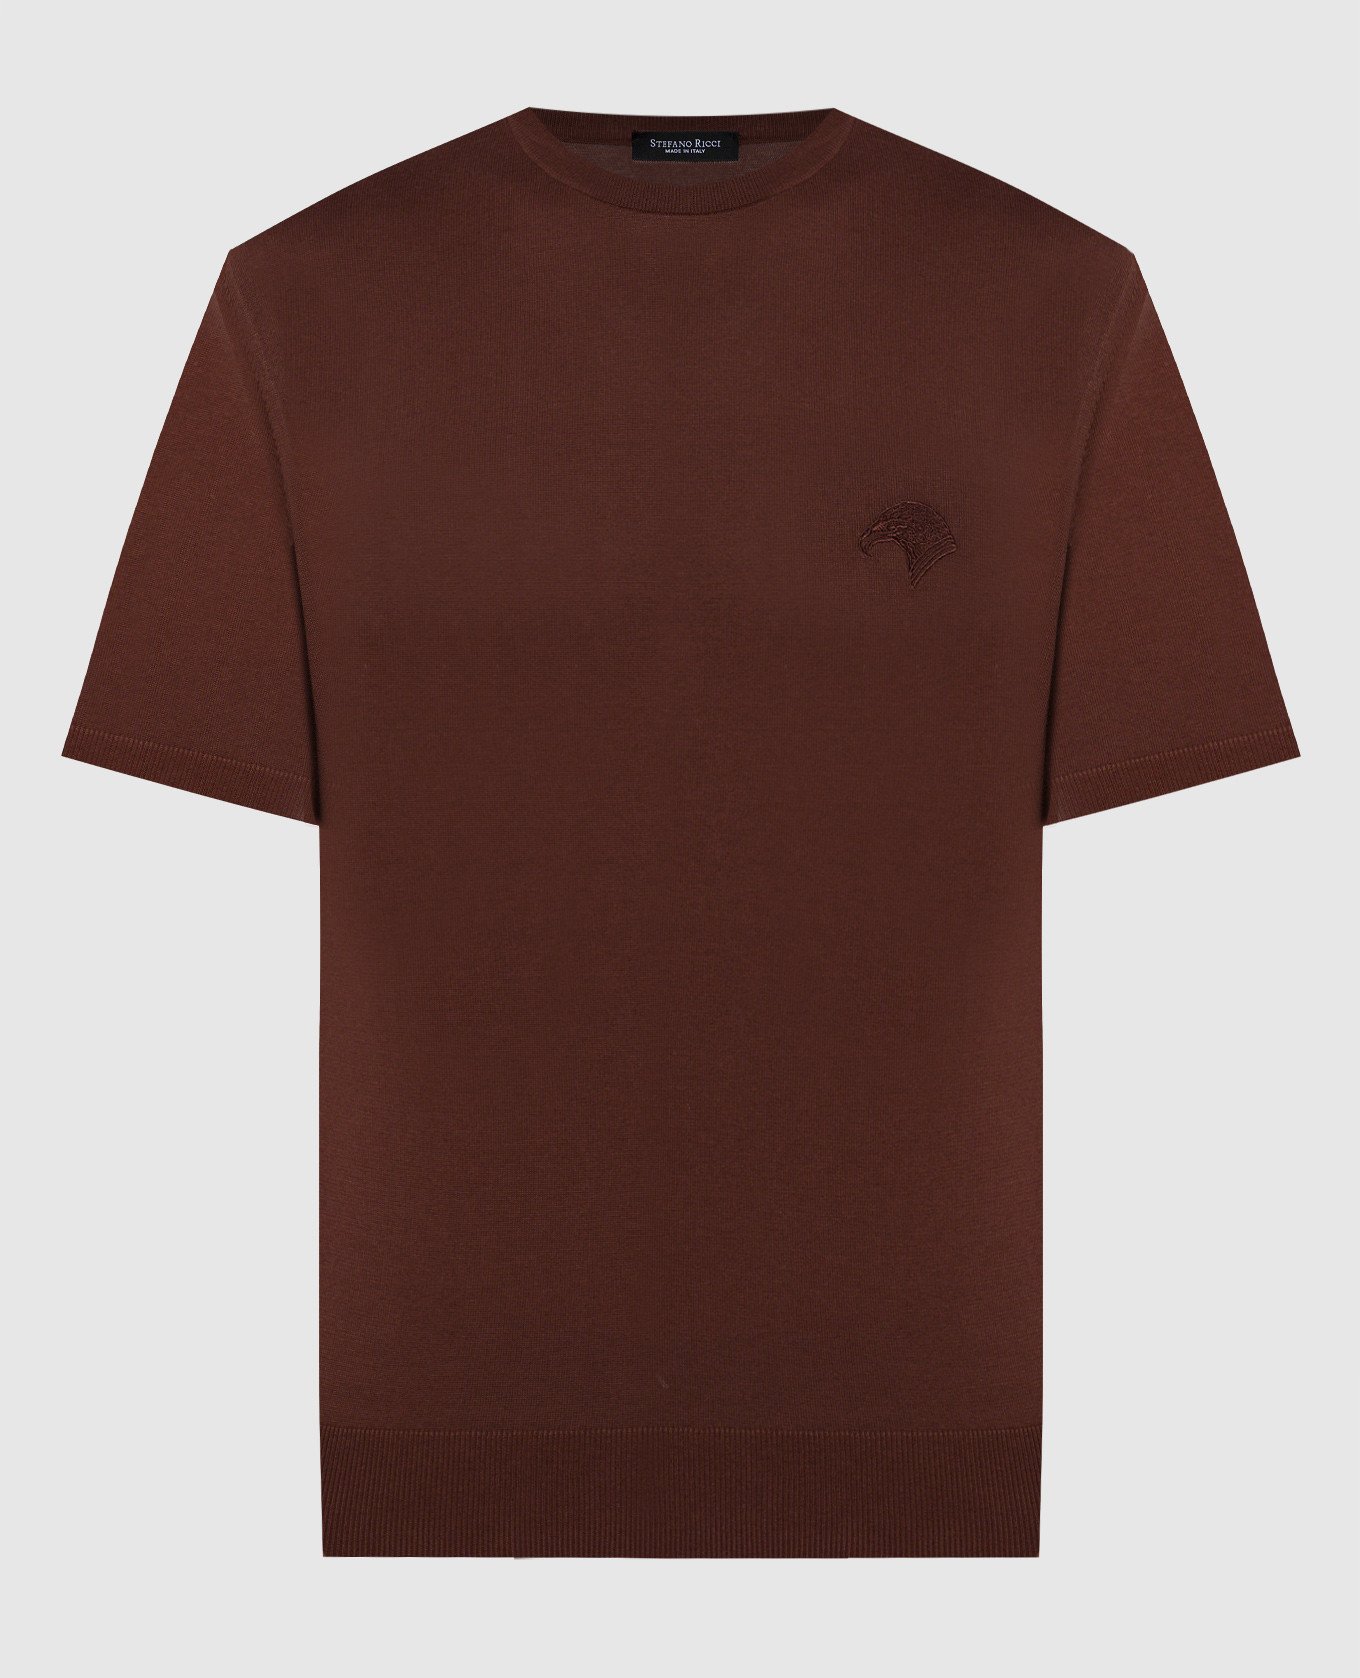 Brown t-shirt with logo emblem embroidery